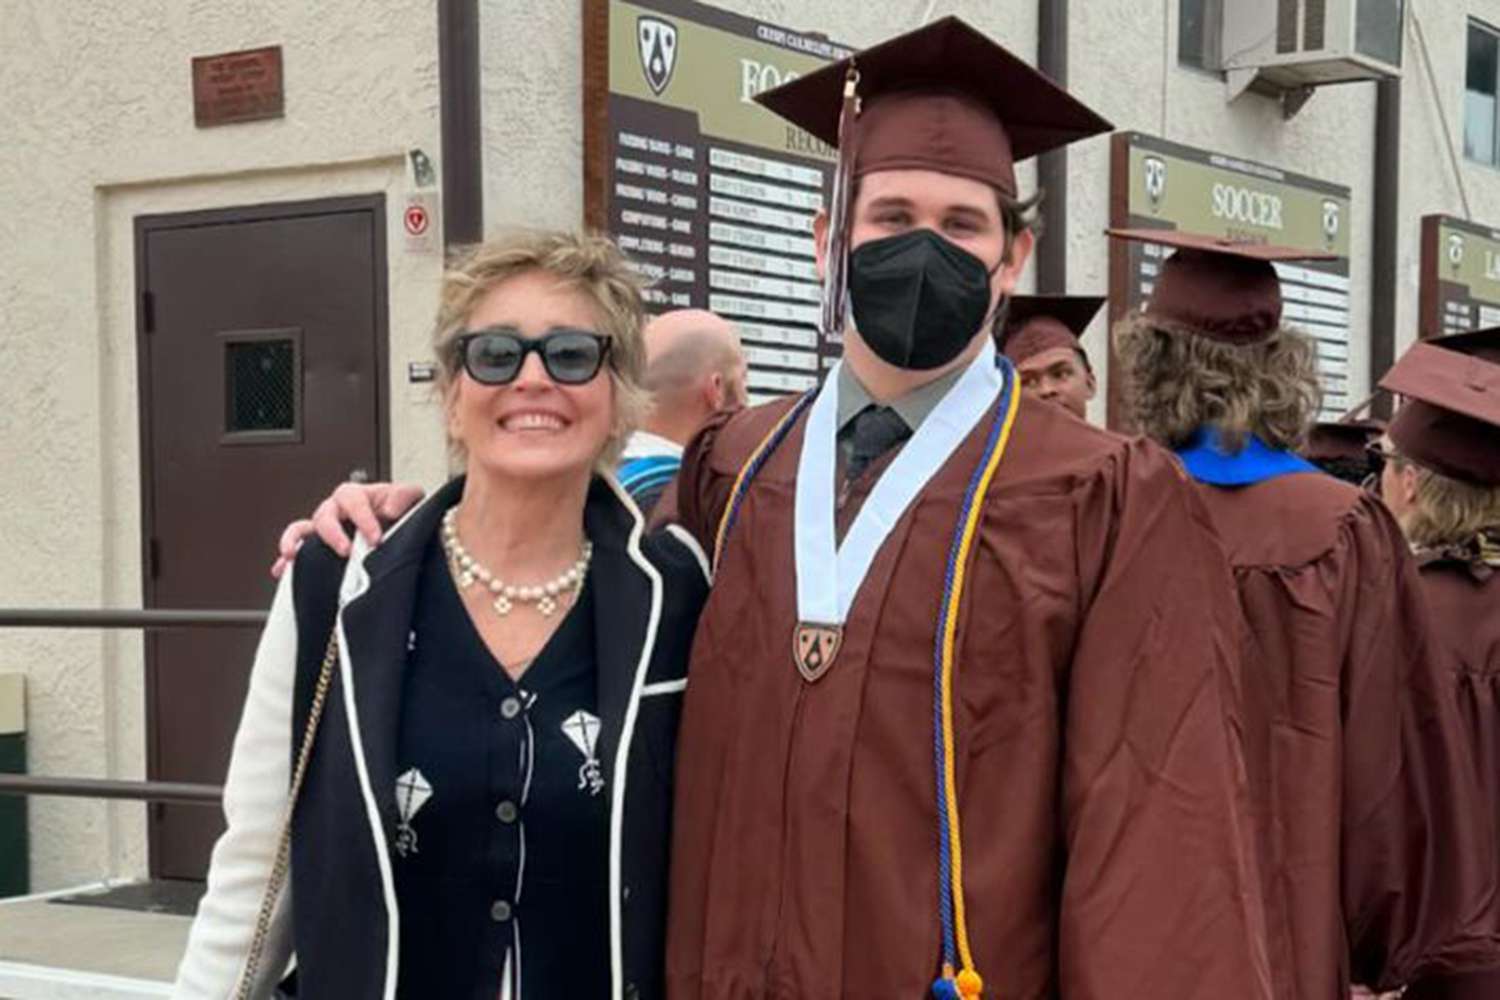 Sharon Stone Is Proud Mom as She Poses with Son Laird at His High School Graduation